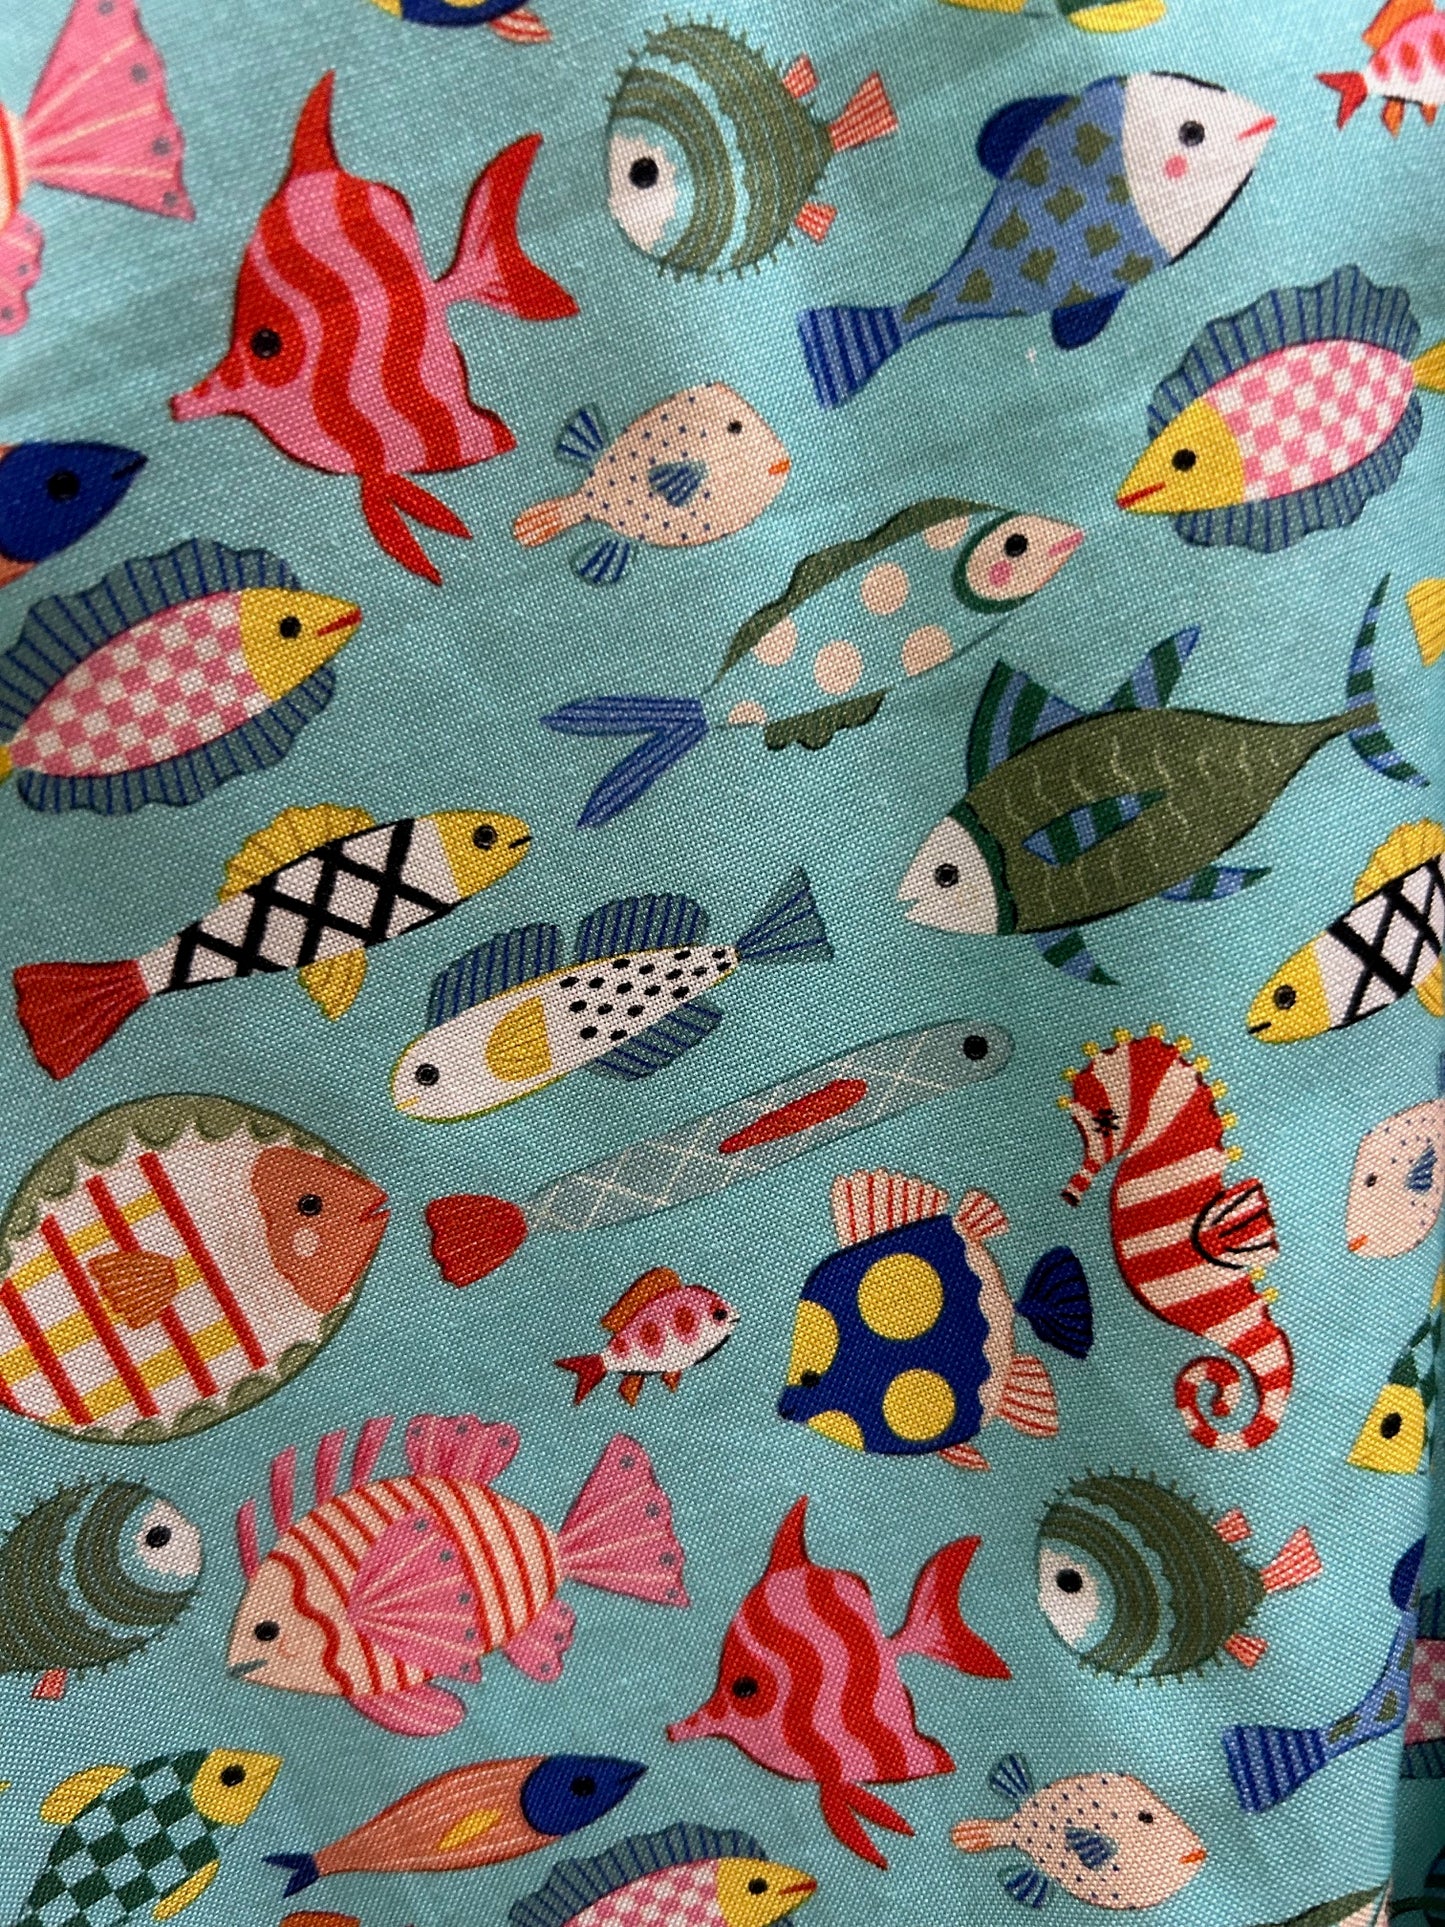 a close up of the fabric print showing details on the colorful fish on blue background